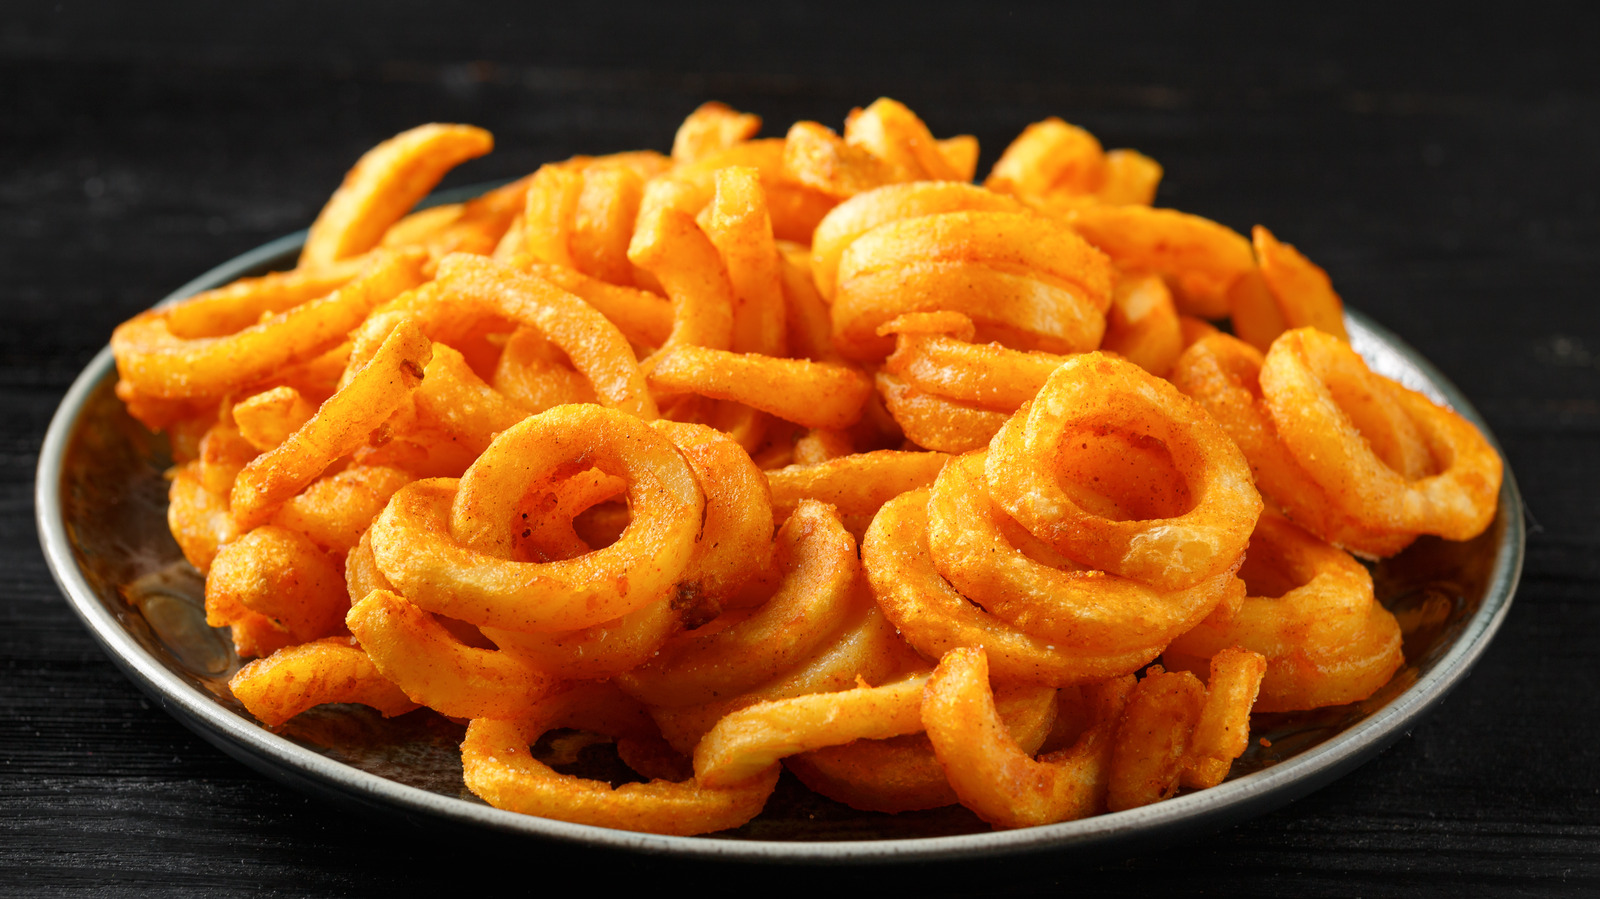 The Clever Hack To Get Curly Fries Without A Spiralizer